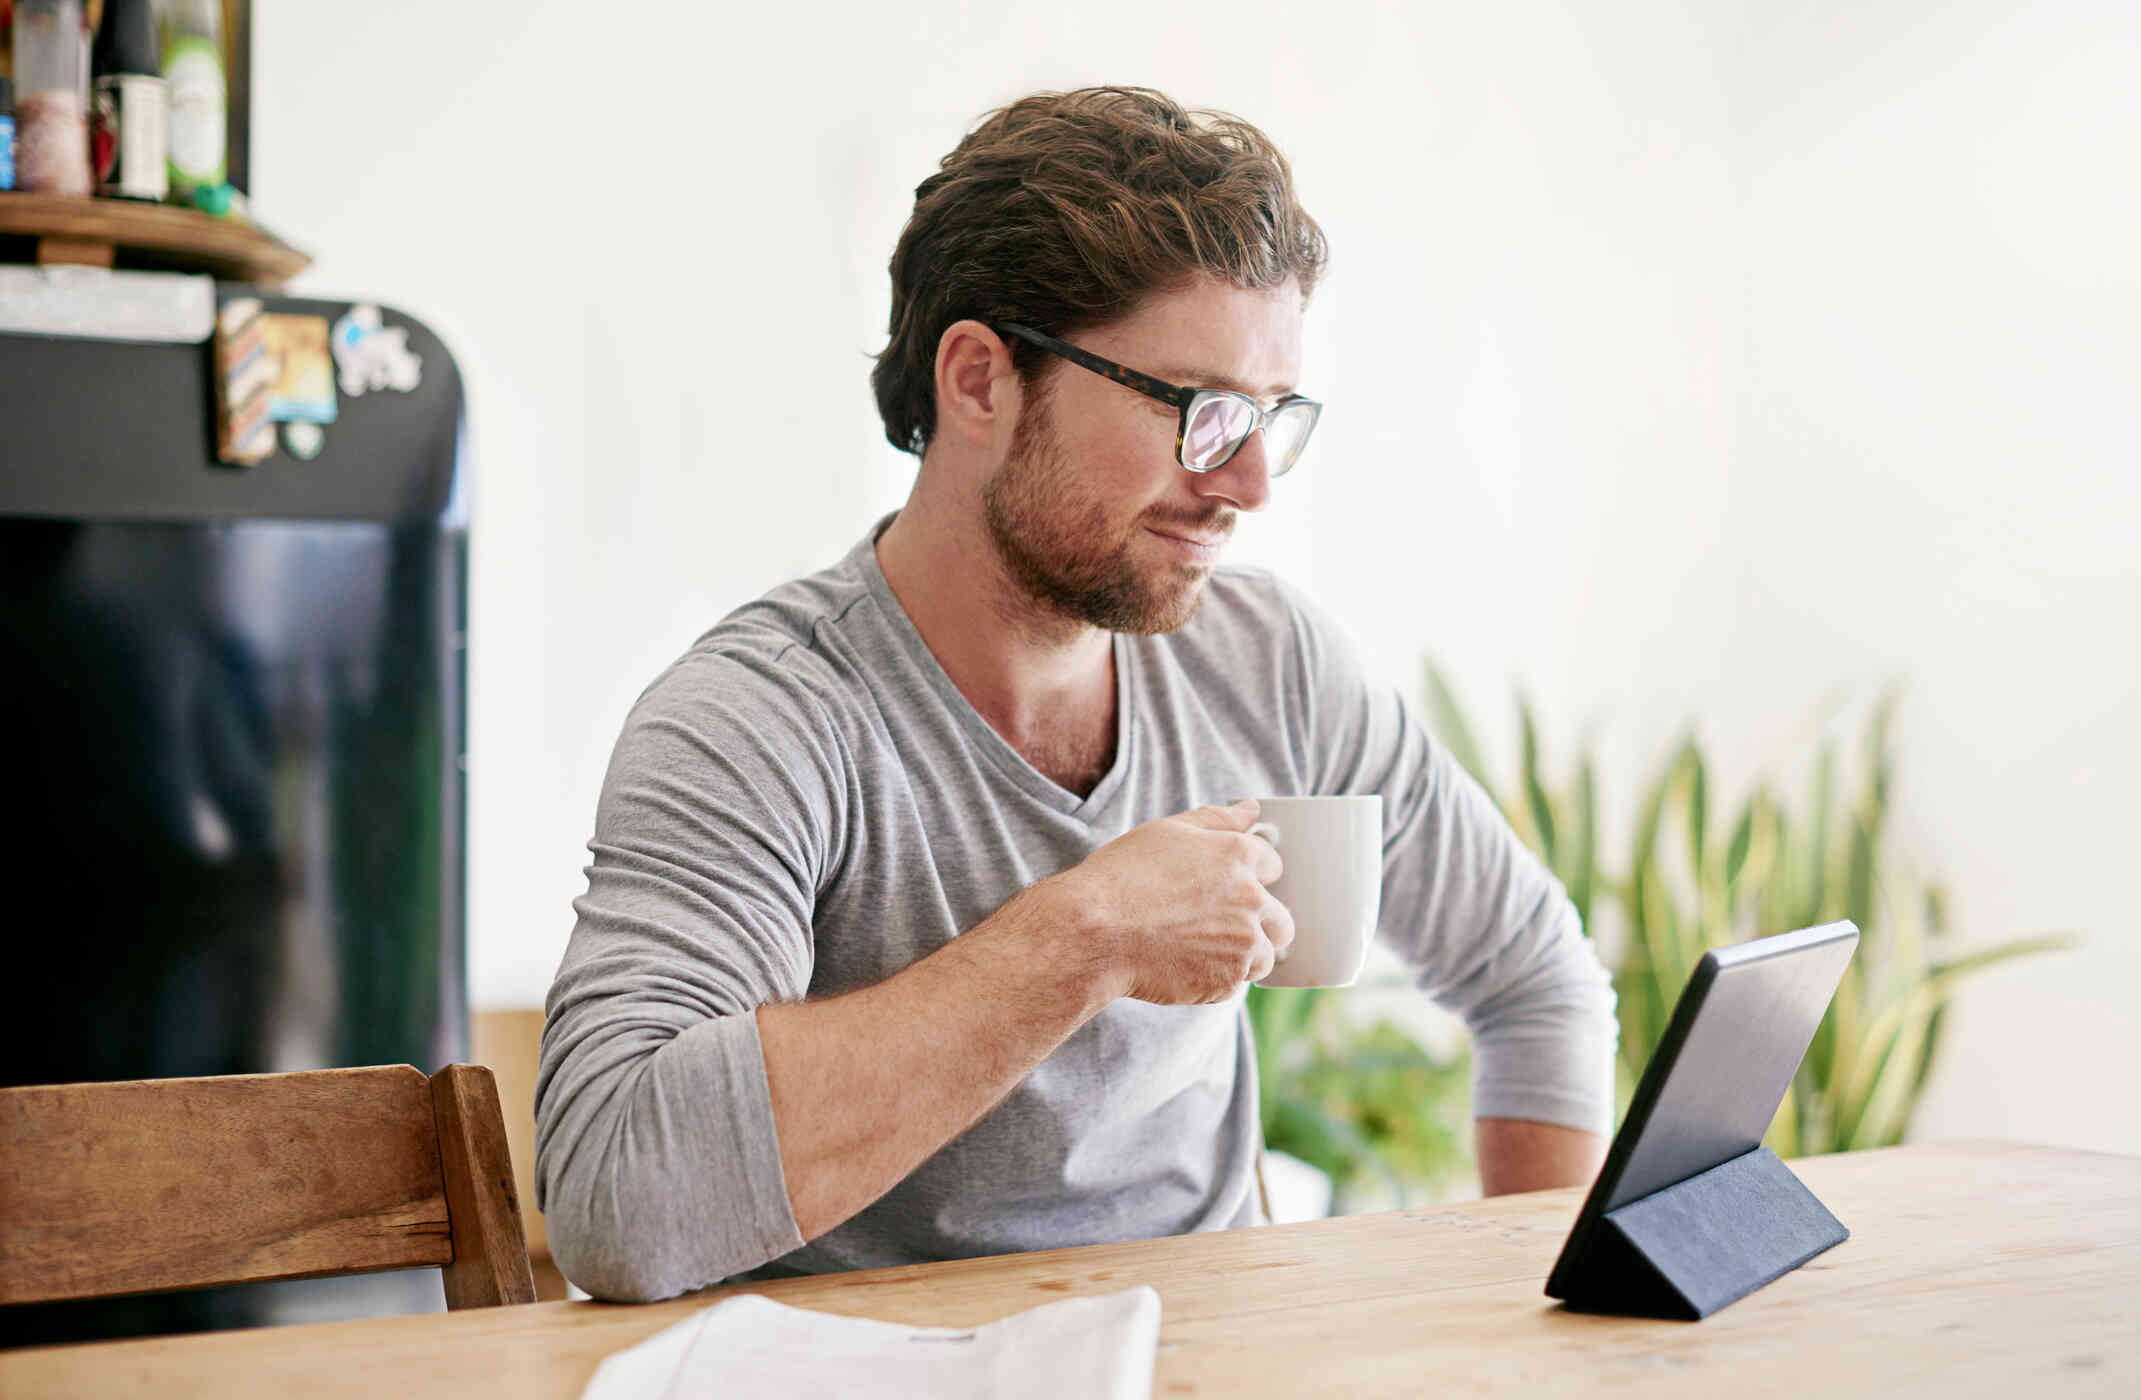 A man in a grey shirt sits at the kitchen table and holds a cup of coffee while smirking down at the tablet on the table infront of him.